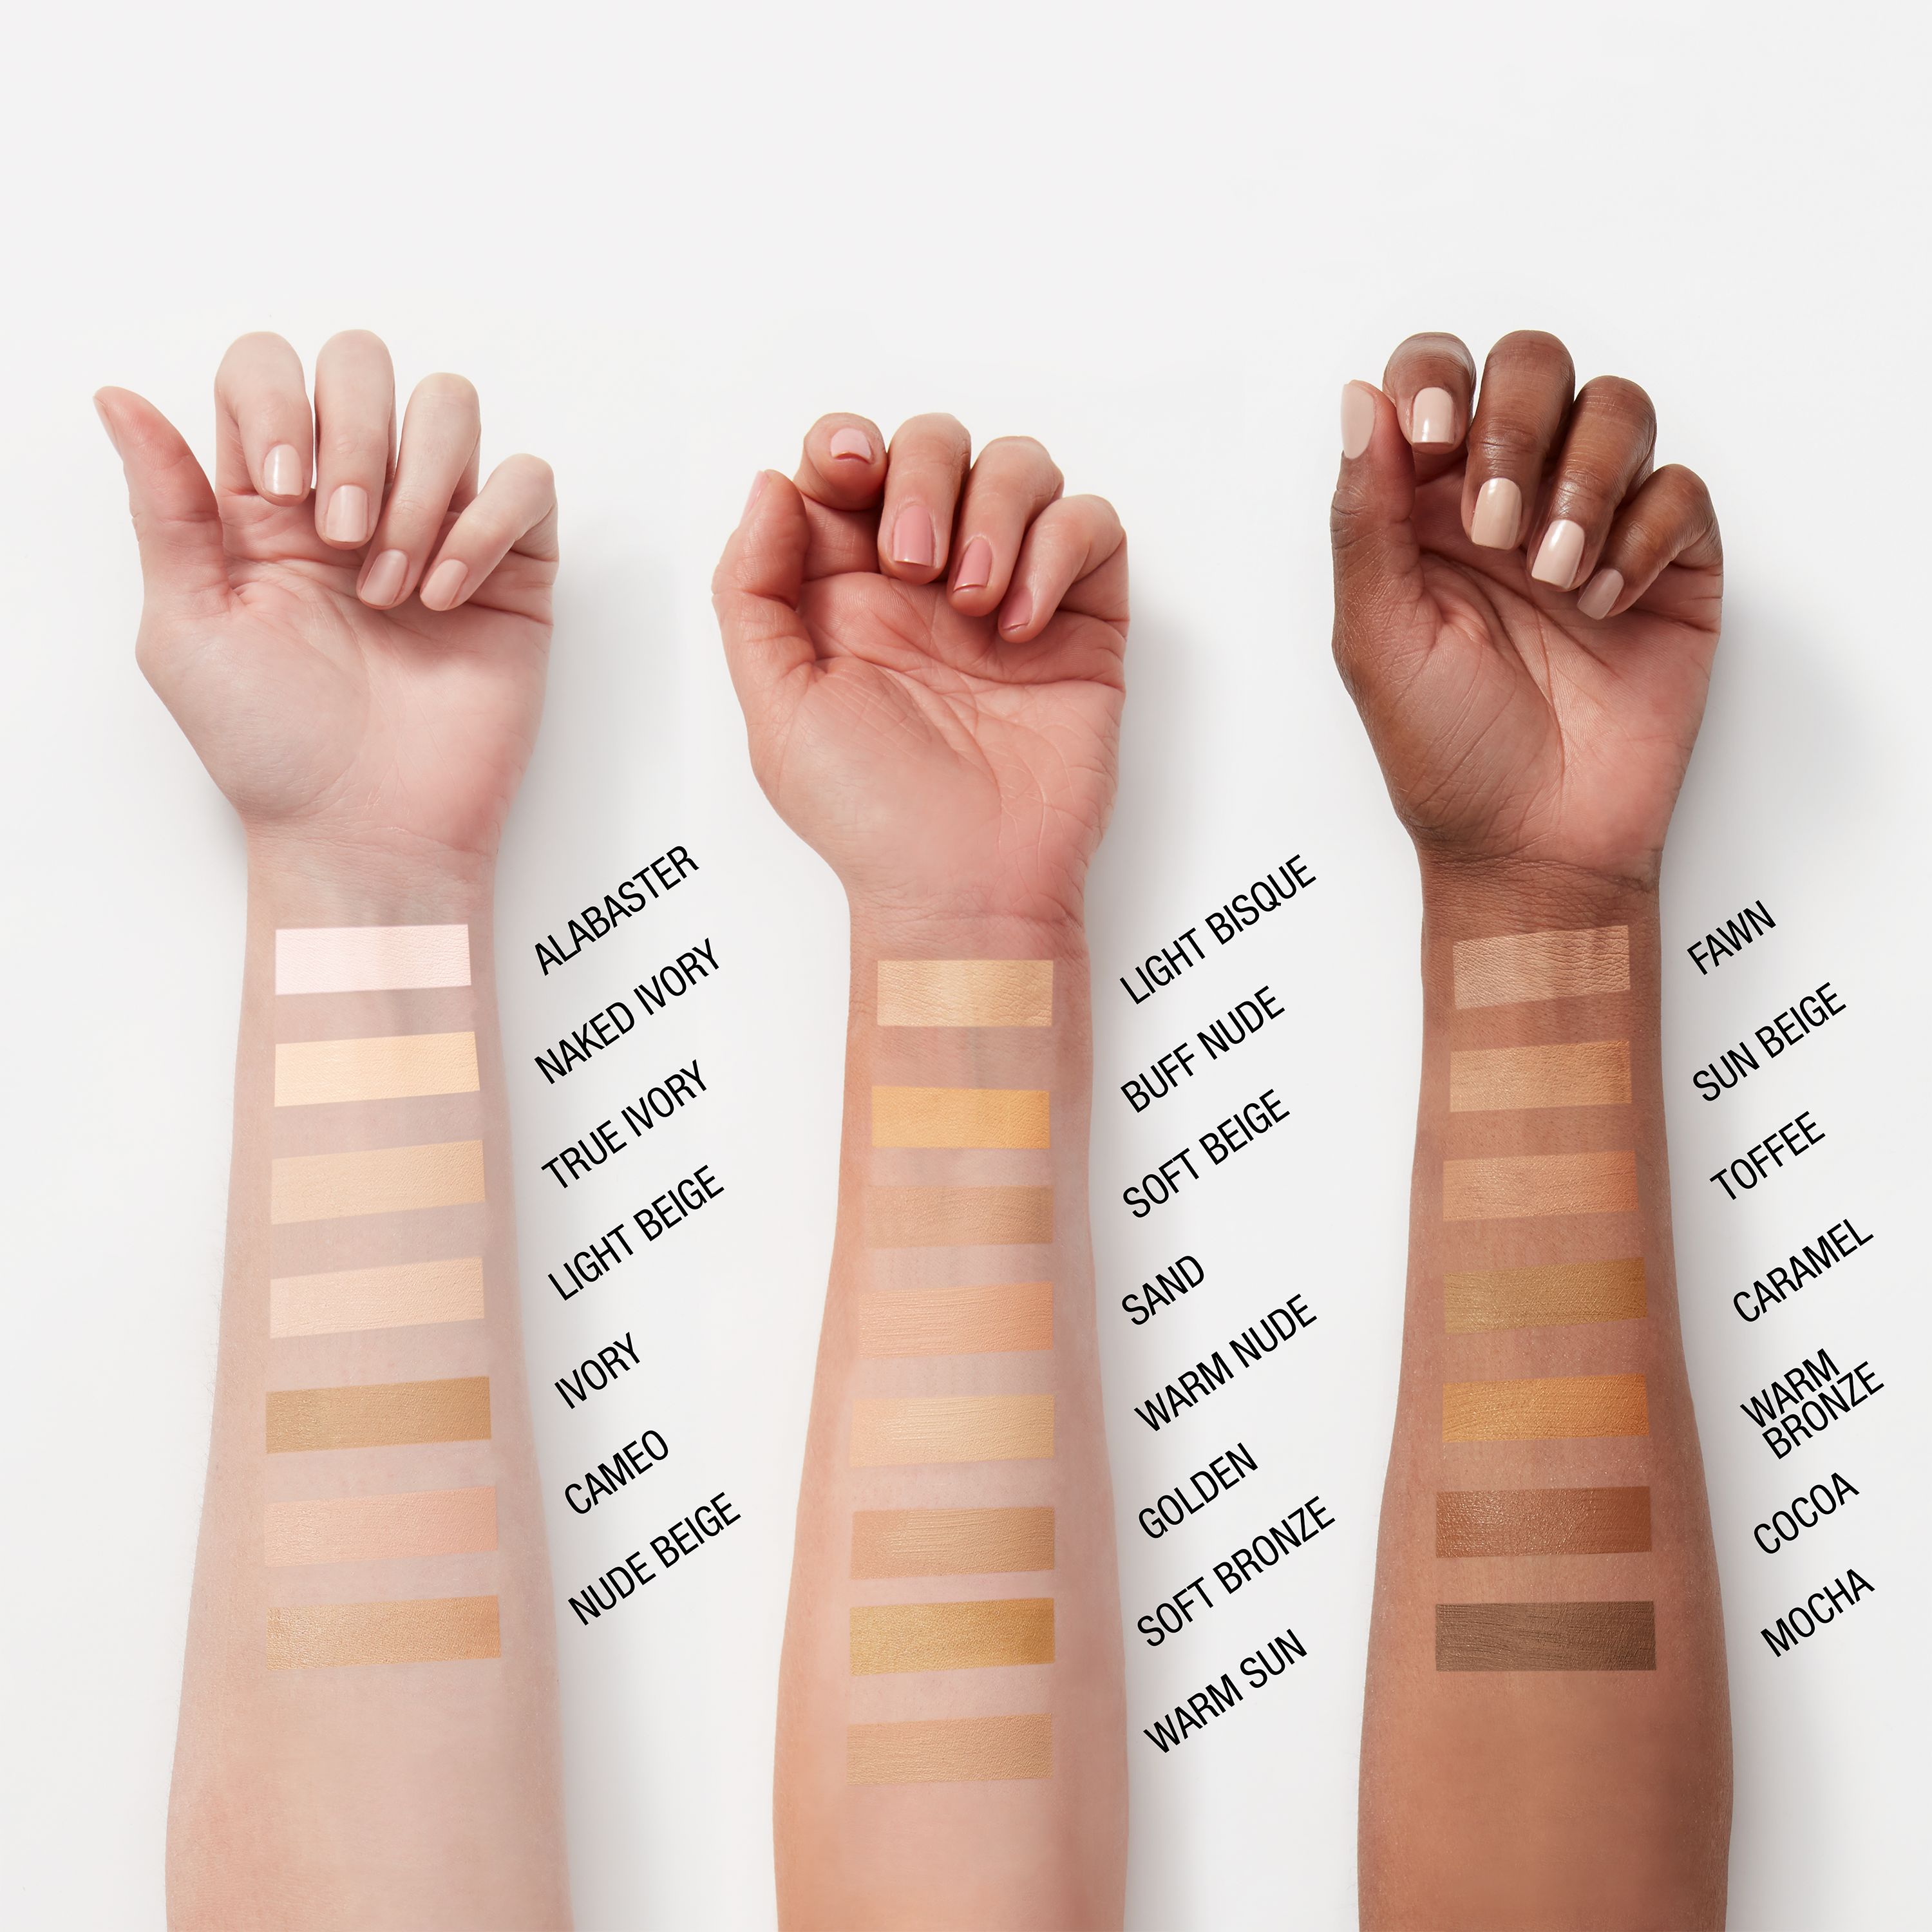 *not all shades are available in Belgium. You can find the exact shade availability in the L'Oréal Press File